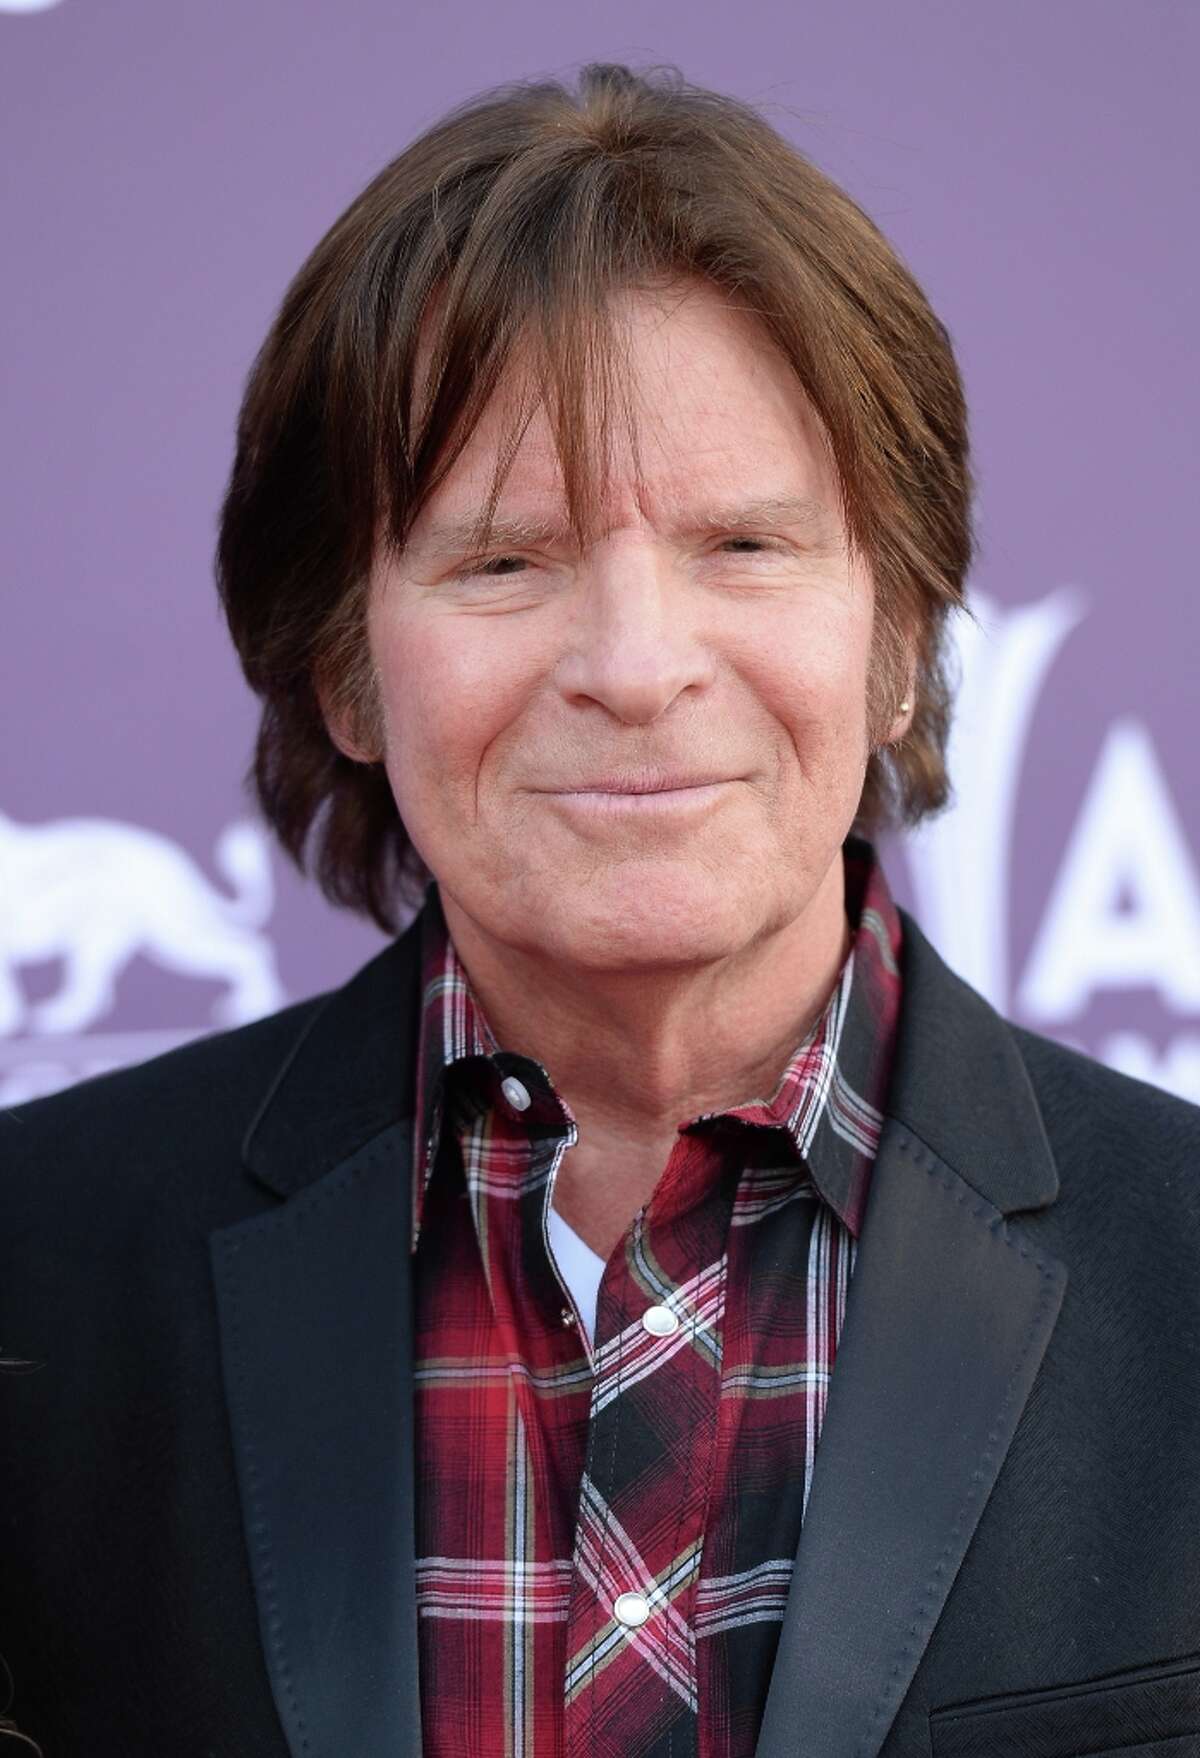 LAS VEGAS, NV - APRIL 07: Musician John Fogerty attends the 48th Annual Academy of Country Music Awards at the MGM Grand Garden Arena on April 7, 2013 in Las Vegas, Nevada.